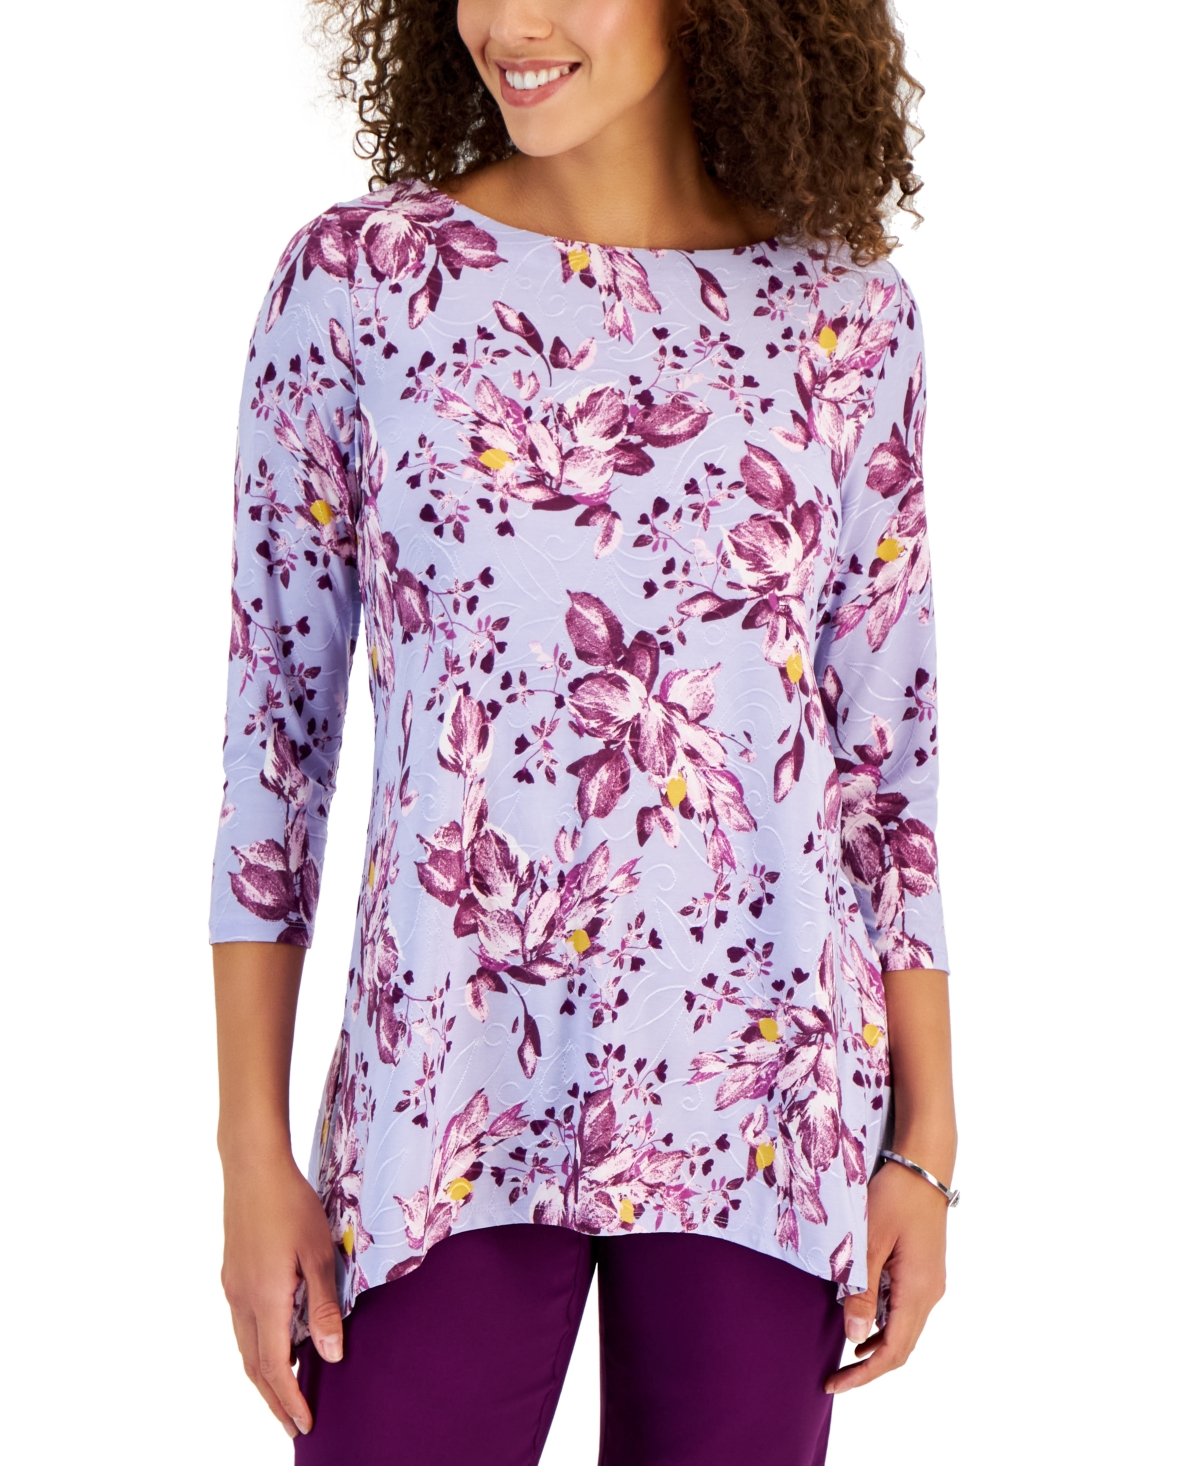 Jm Collection Women's 3/4 Sleeve Printed Jacquard Top, Created For Macy's In Light Lavendar Combo